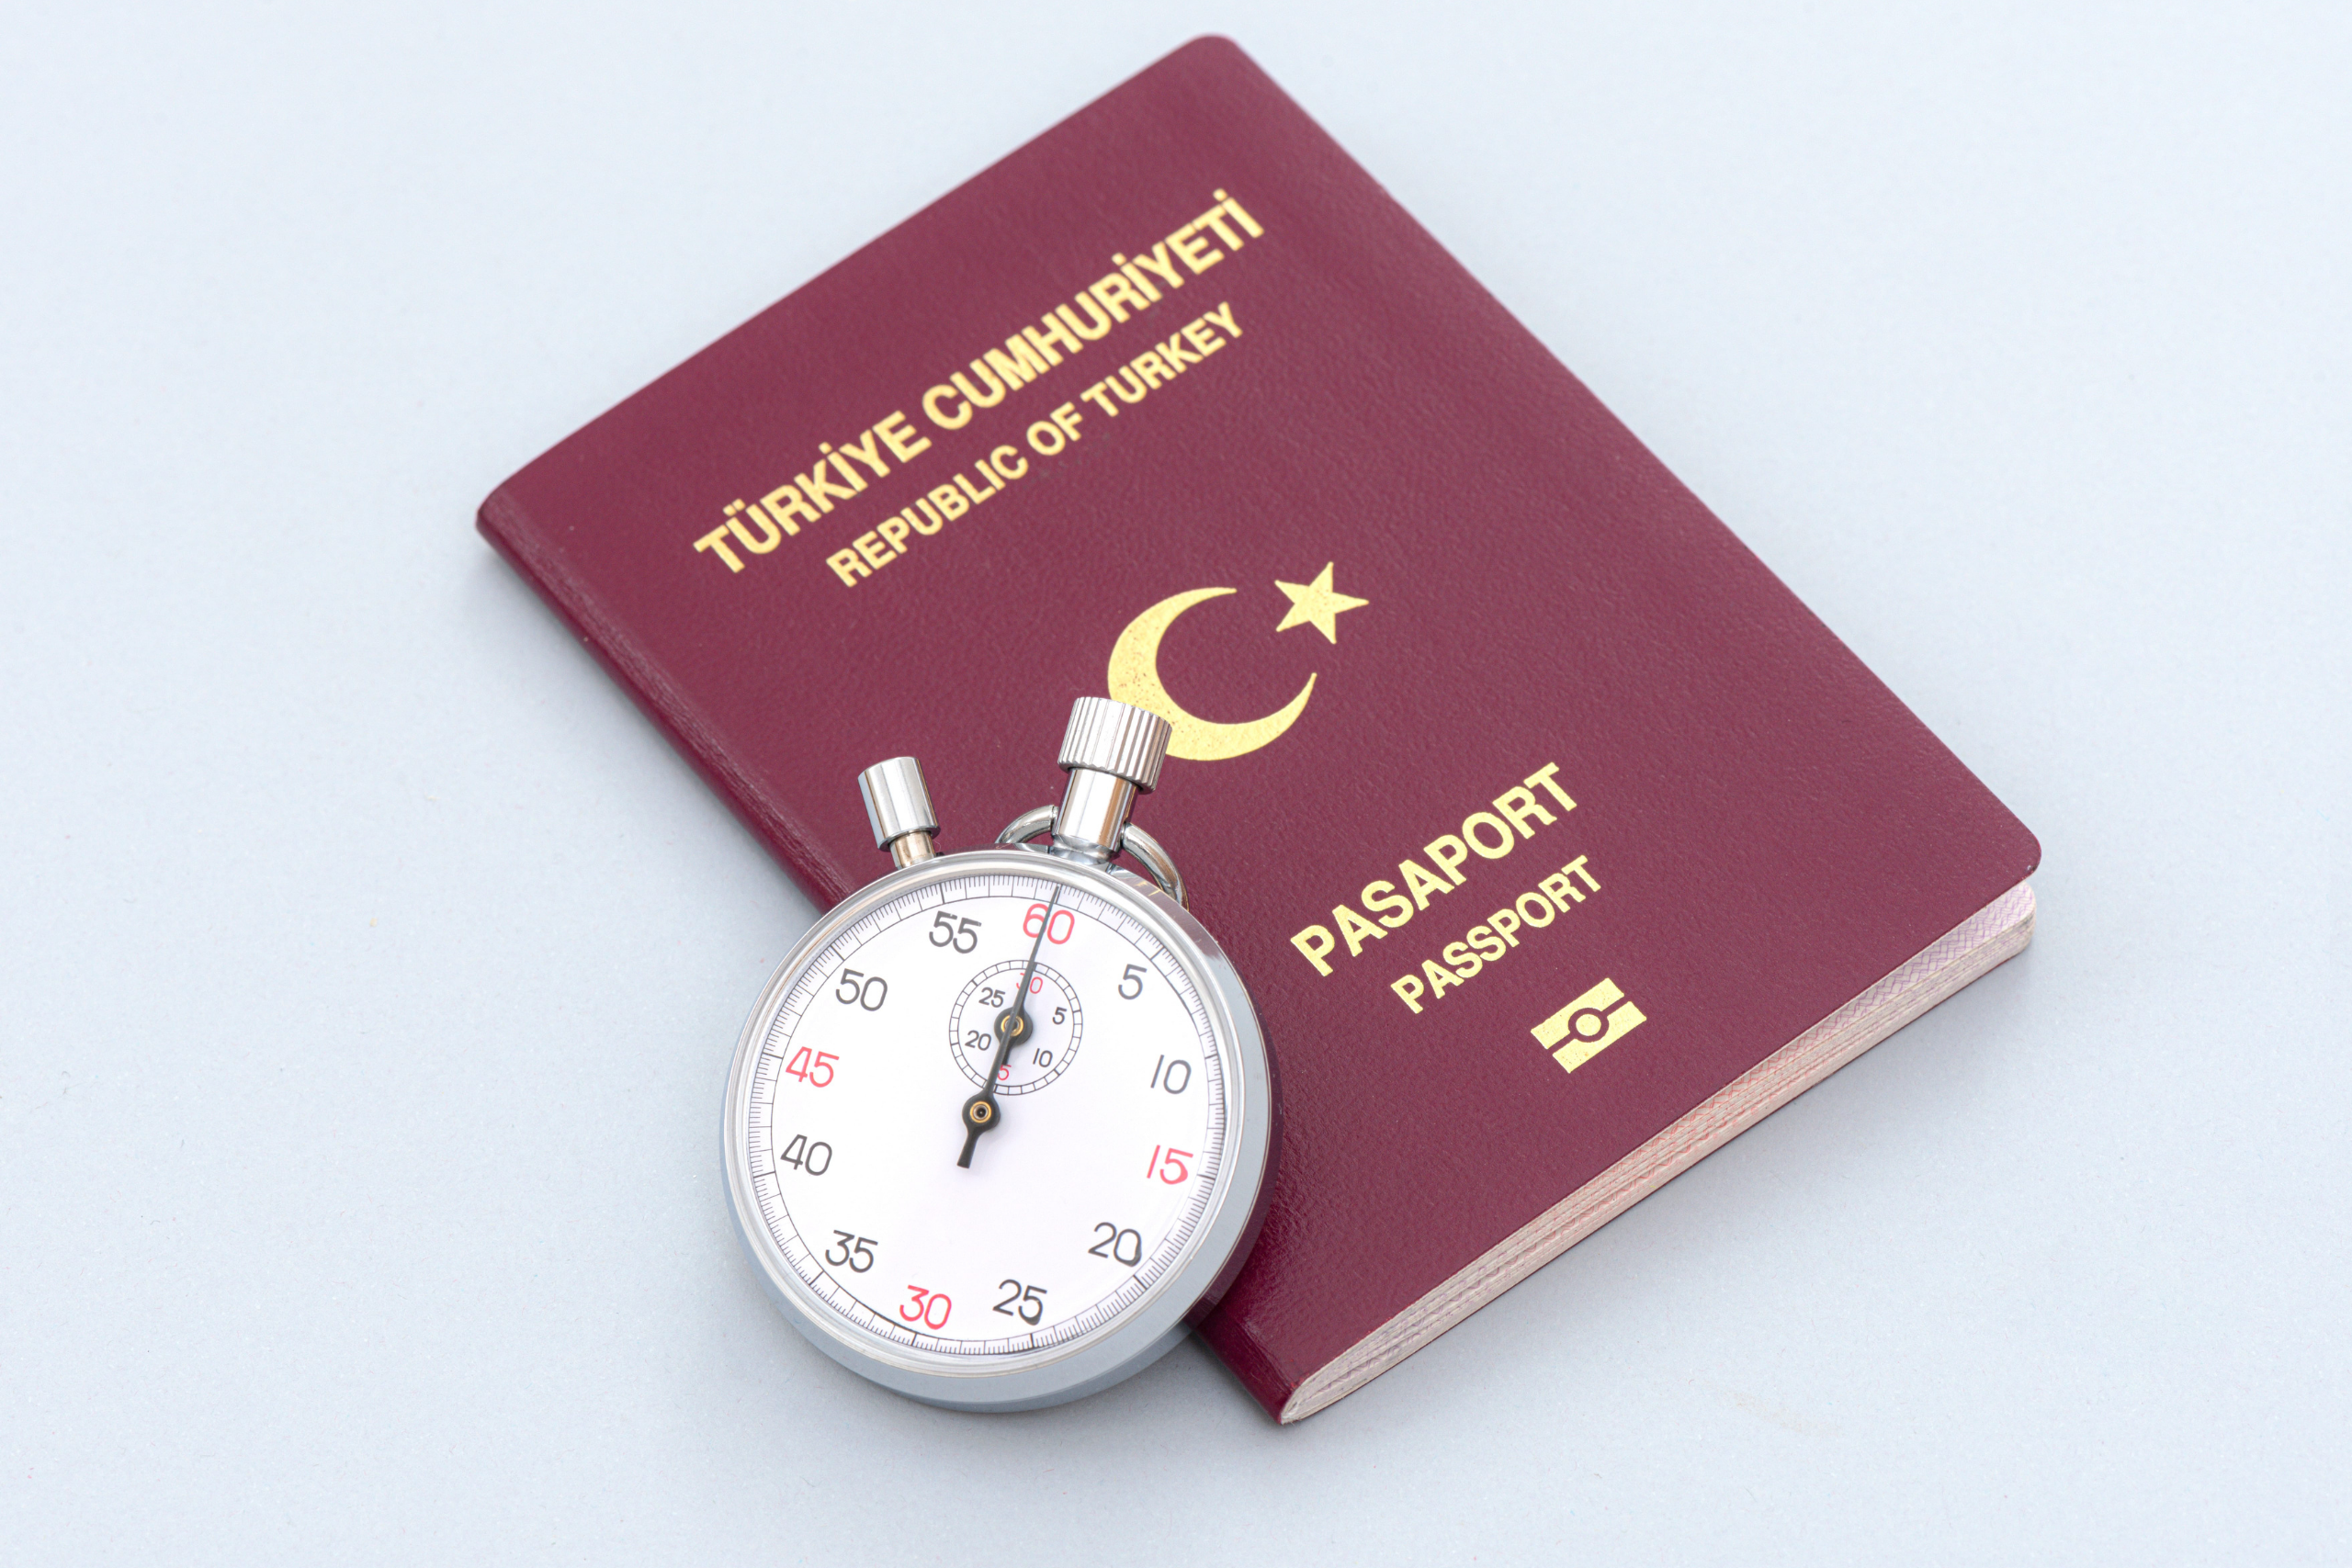 ACQUIRING TURKISH CITIZENSHIP BY GENERAL TERMS